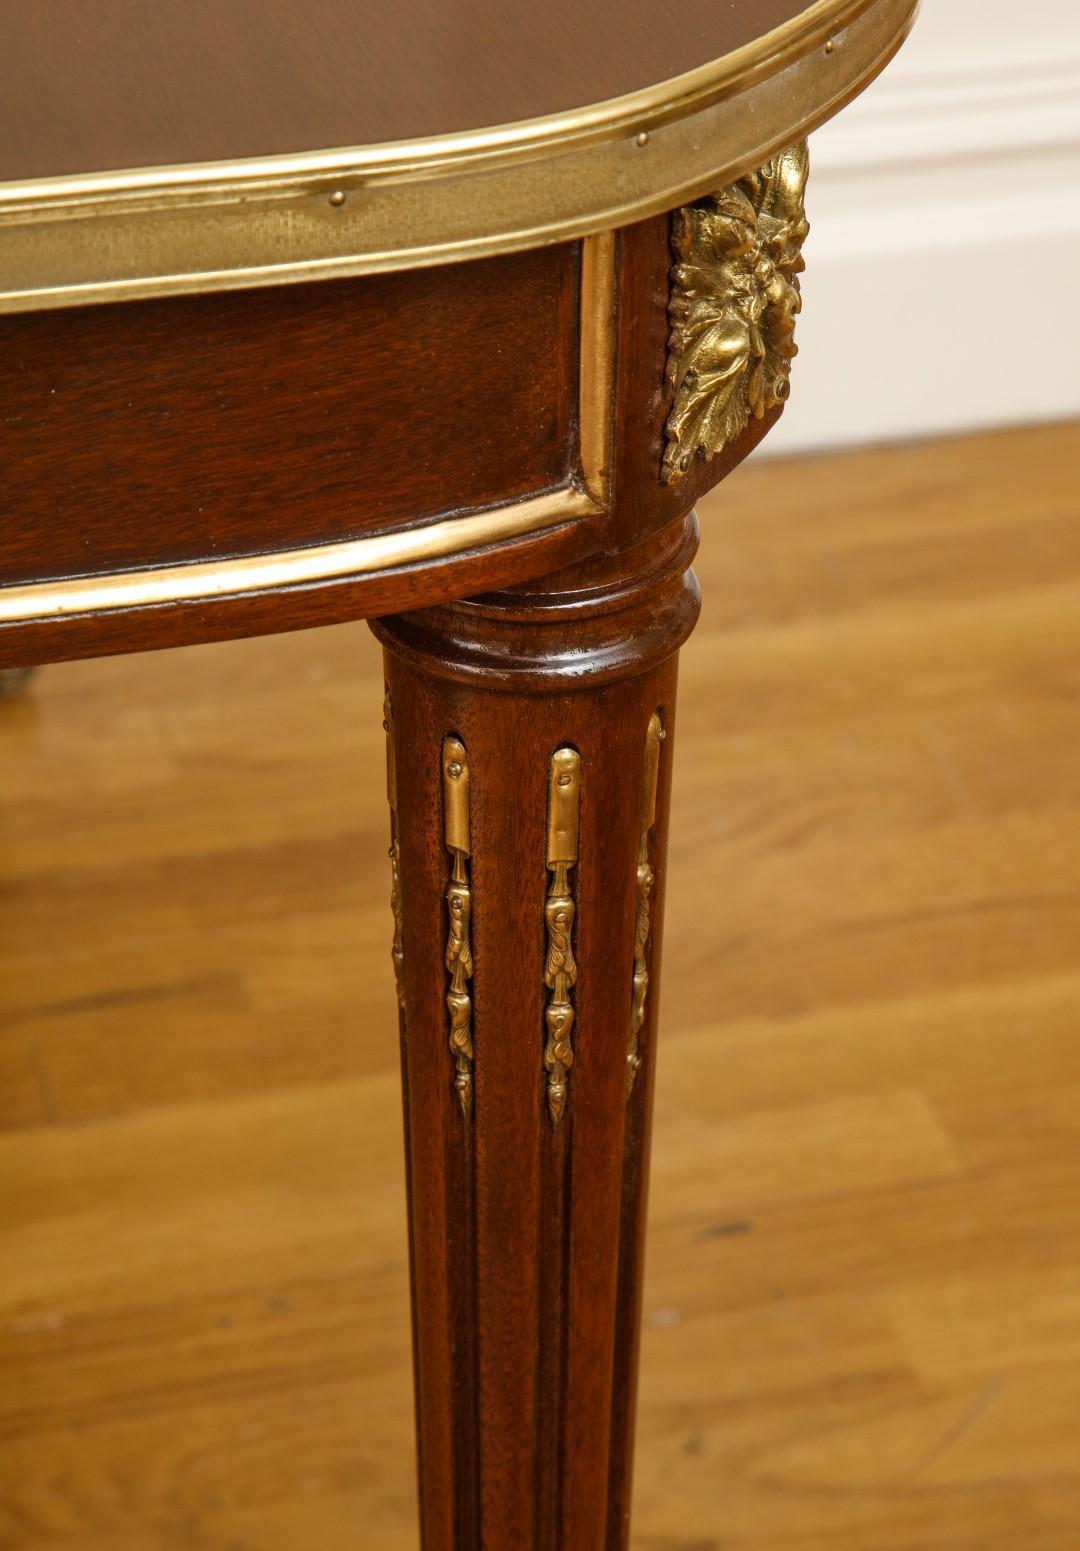 A French Louis XVI style mahogany dining table in the manner of Jansen, with stop fluted tapering legs headed by rosettes, and bronze trim along the surface and castors.
This table includes two leaves, each 24